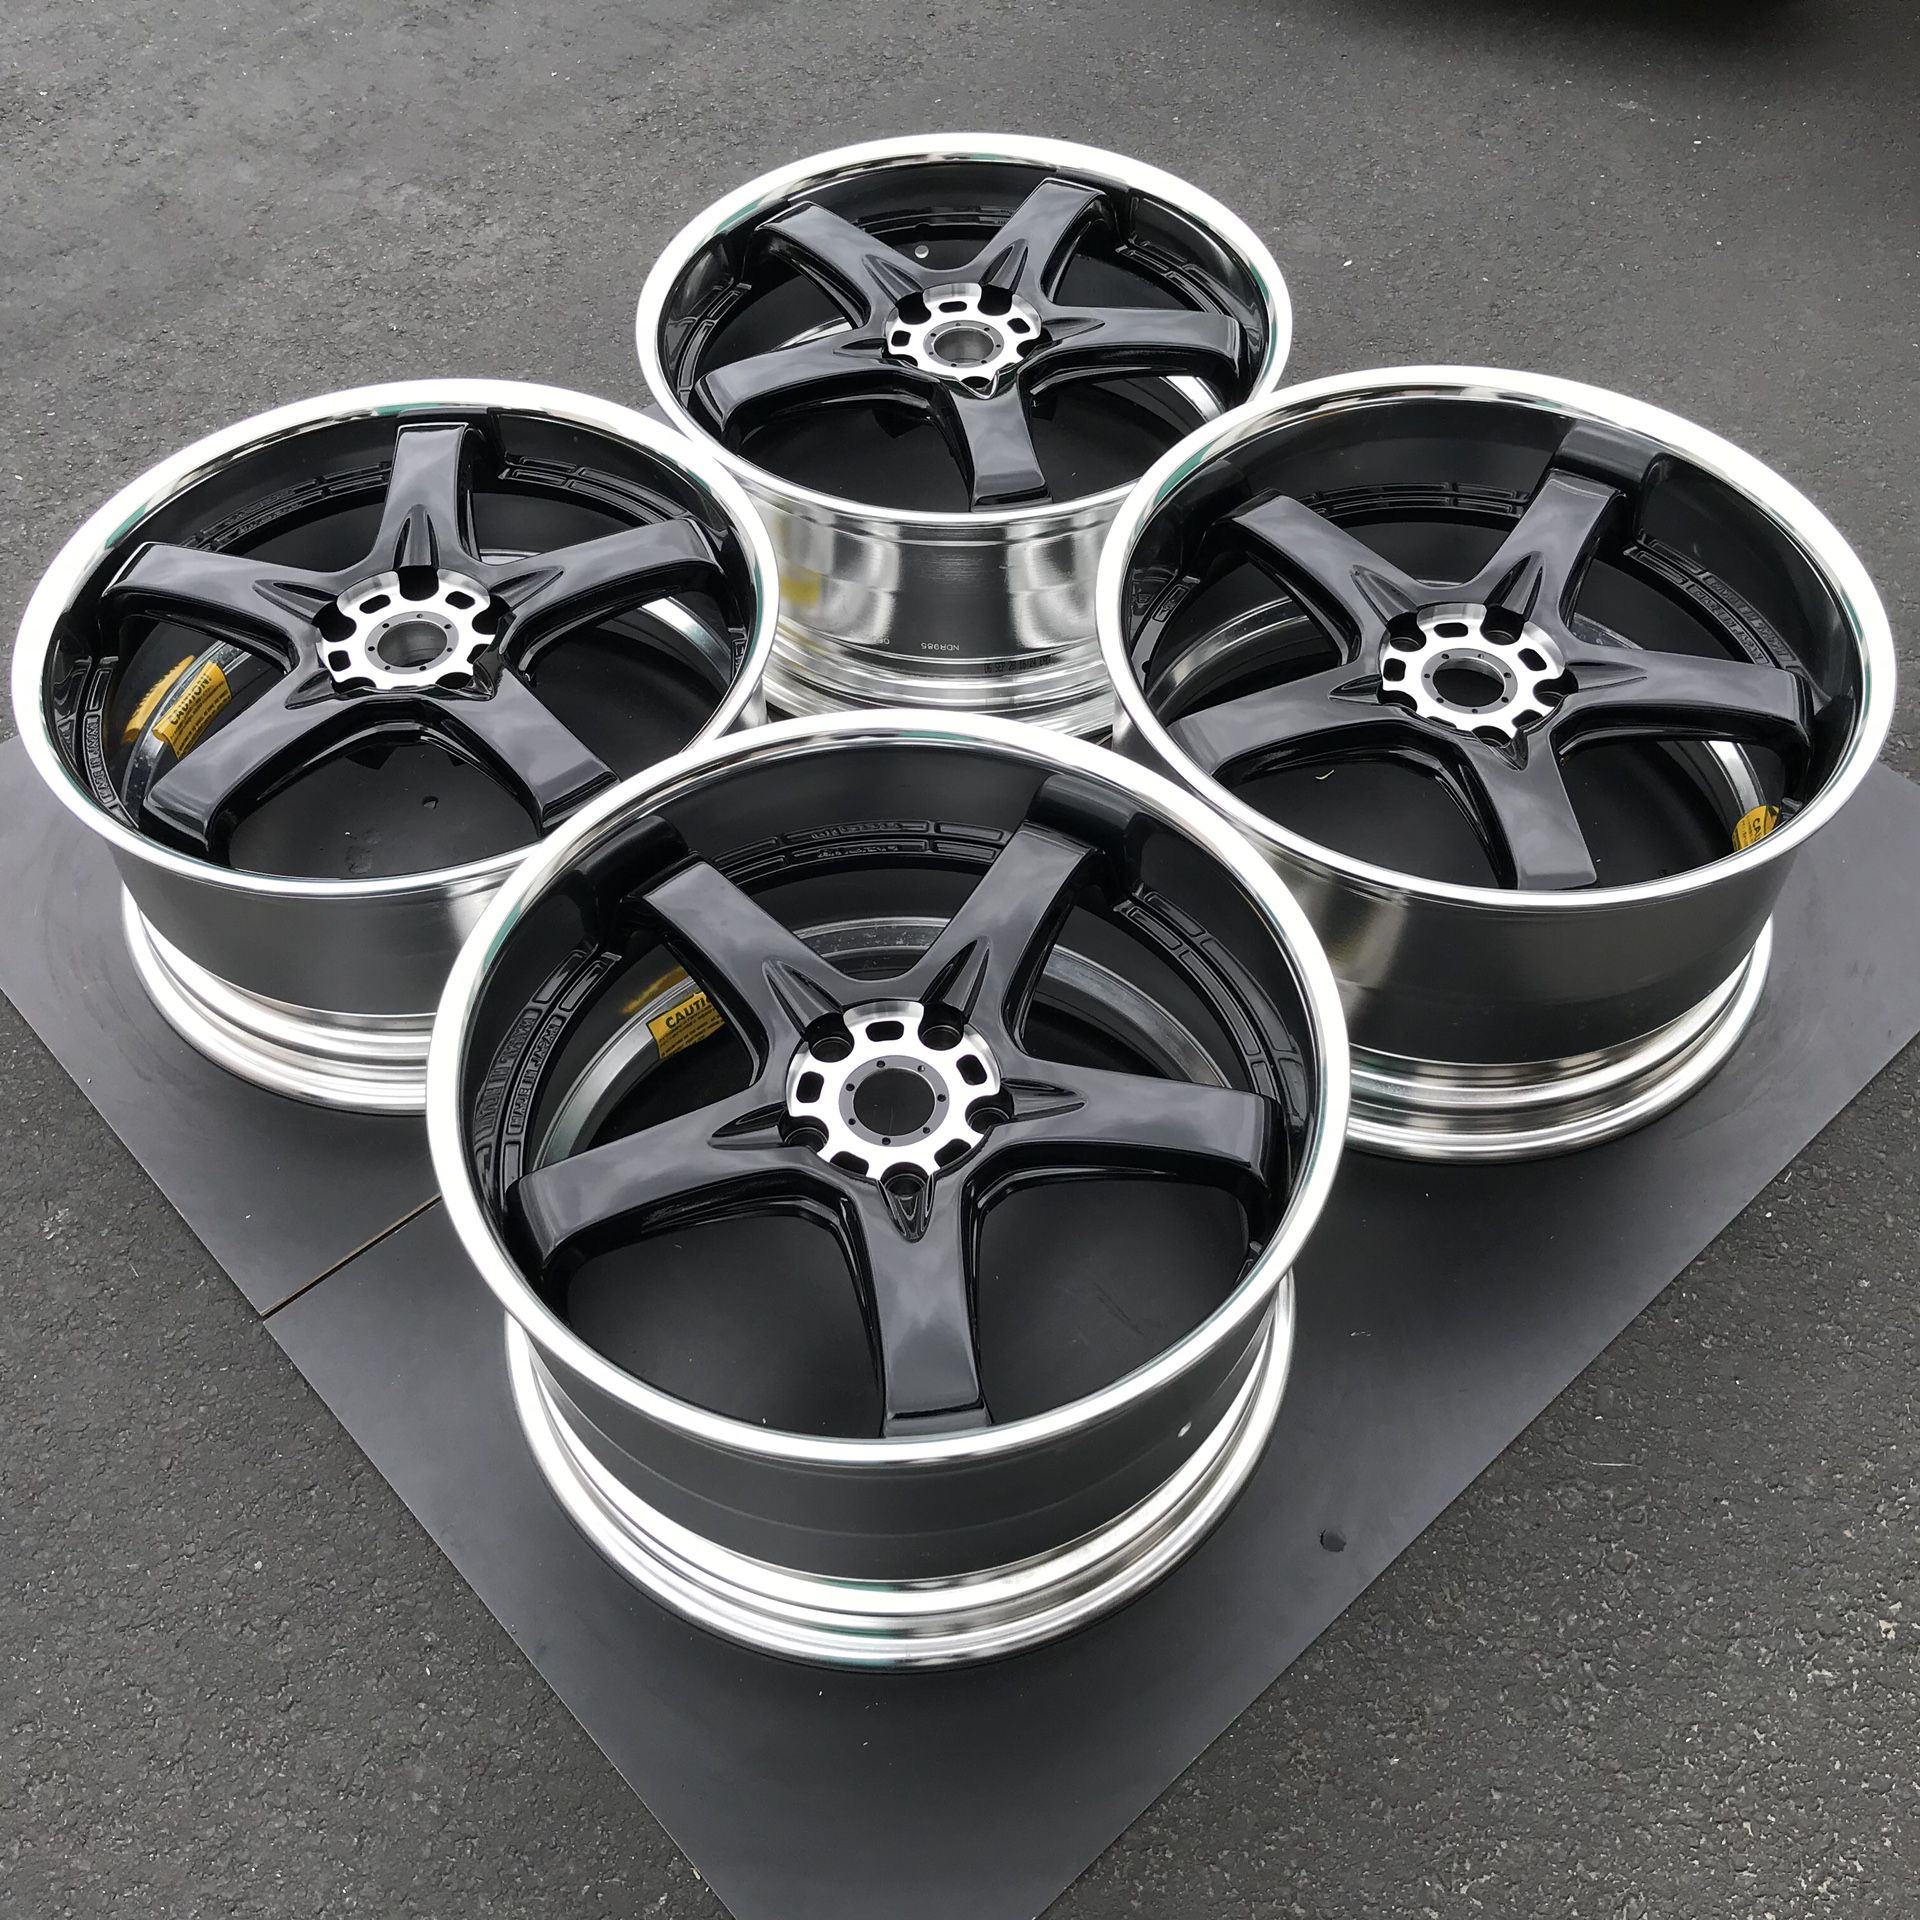 RH PRO R5 Wheels 19x8.5 19x10 5x114.3 - (Made In Japan By Work Wheels) black (2-piece Staggered) - Toyota Supra, Mazda RX-7, Lexus IS250 IS300, Ford